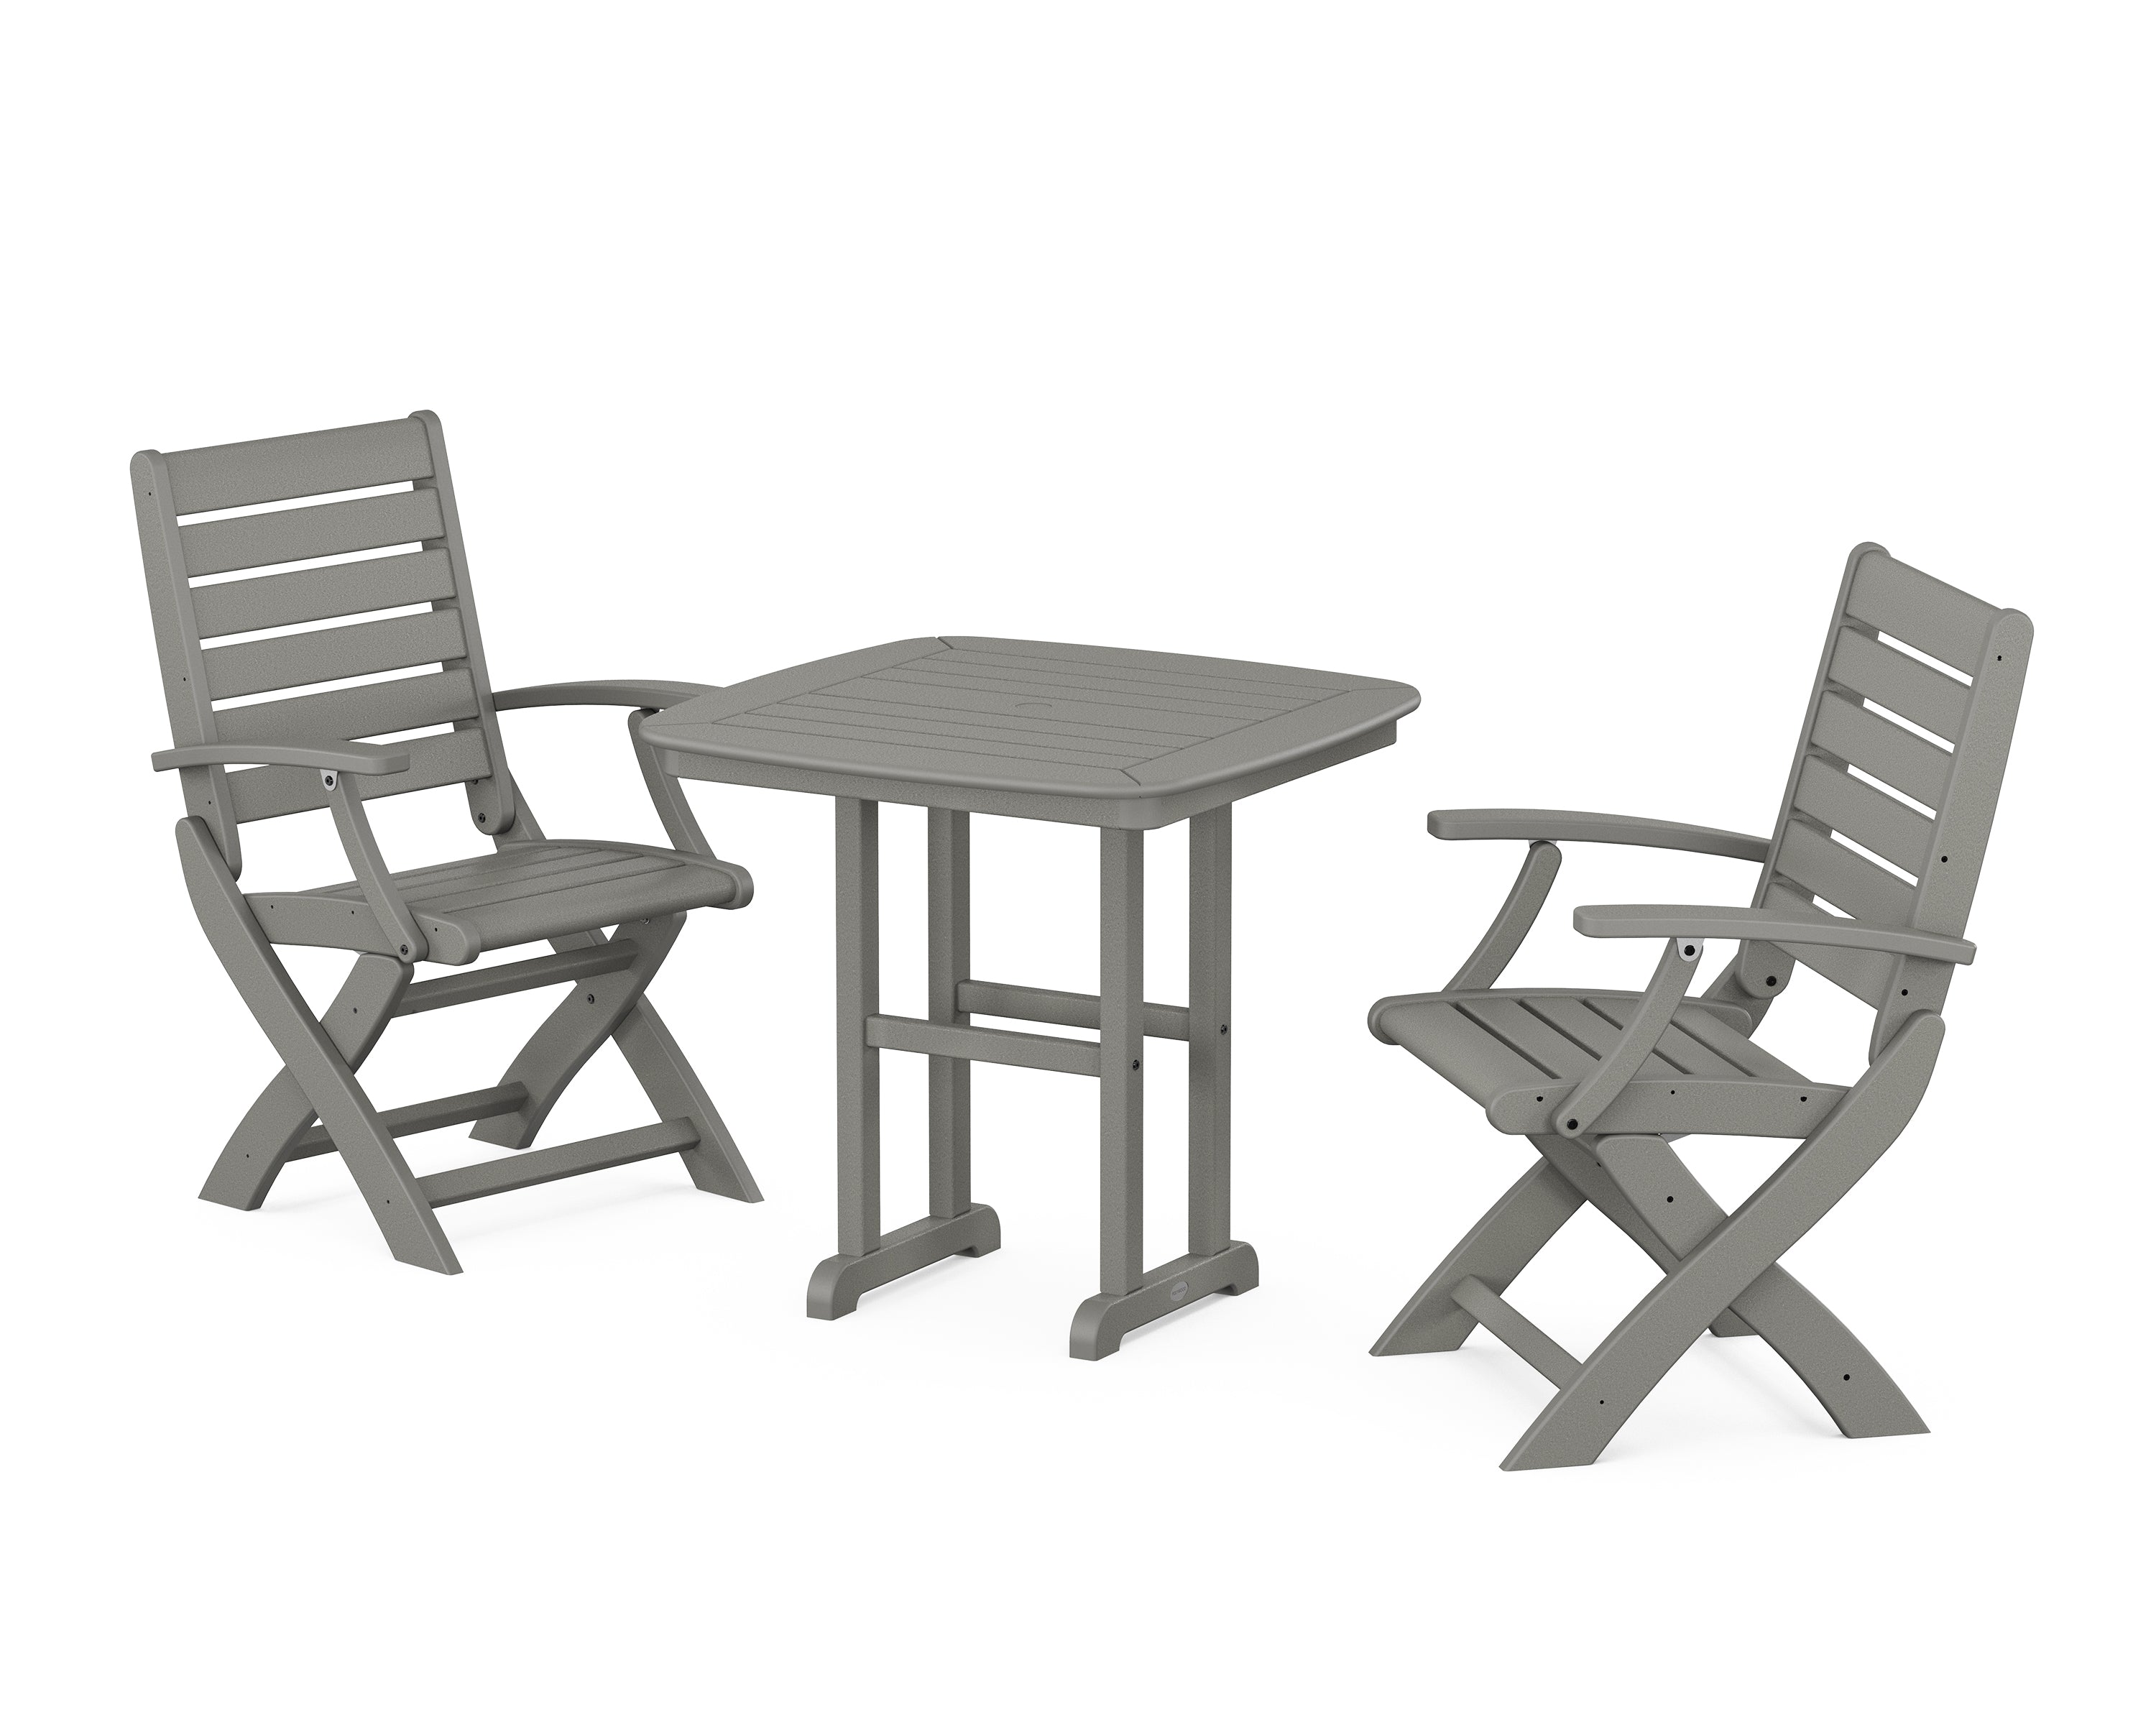 POLYWOOD® Signature Folding Chair 3-Piece Dining Set in Slate Grey